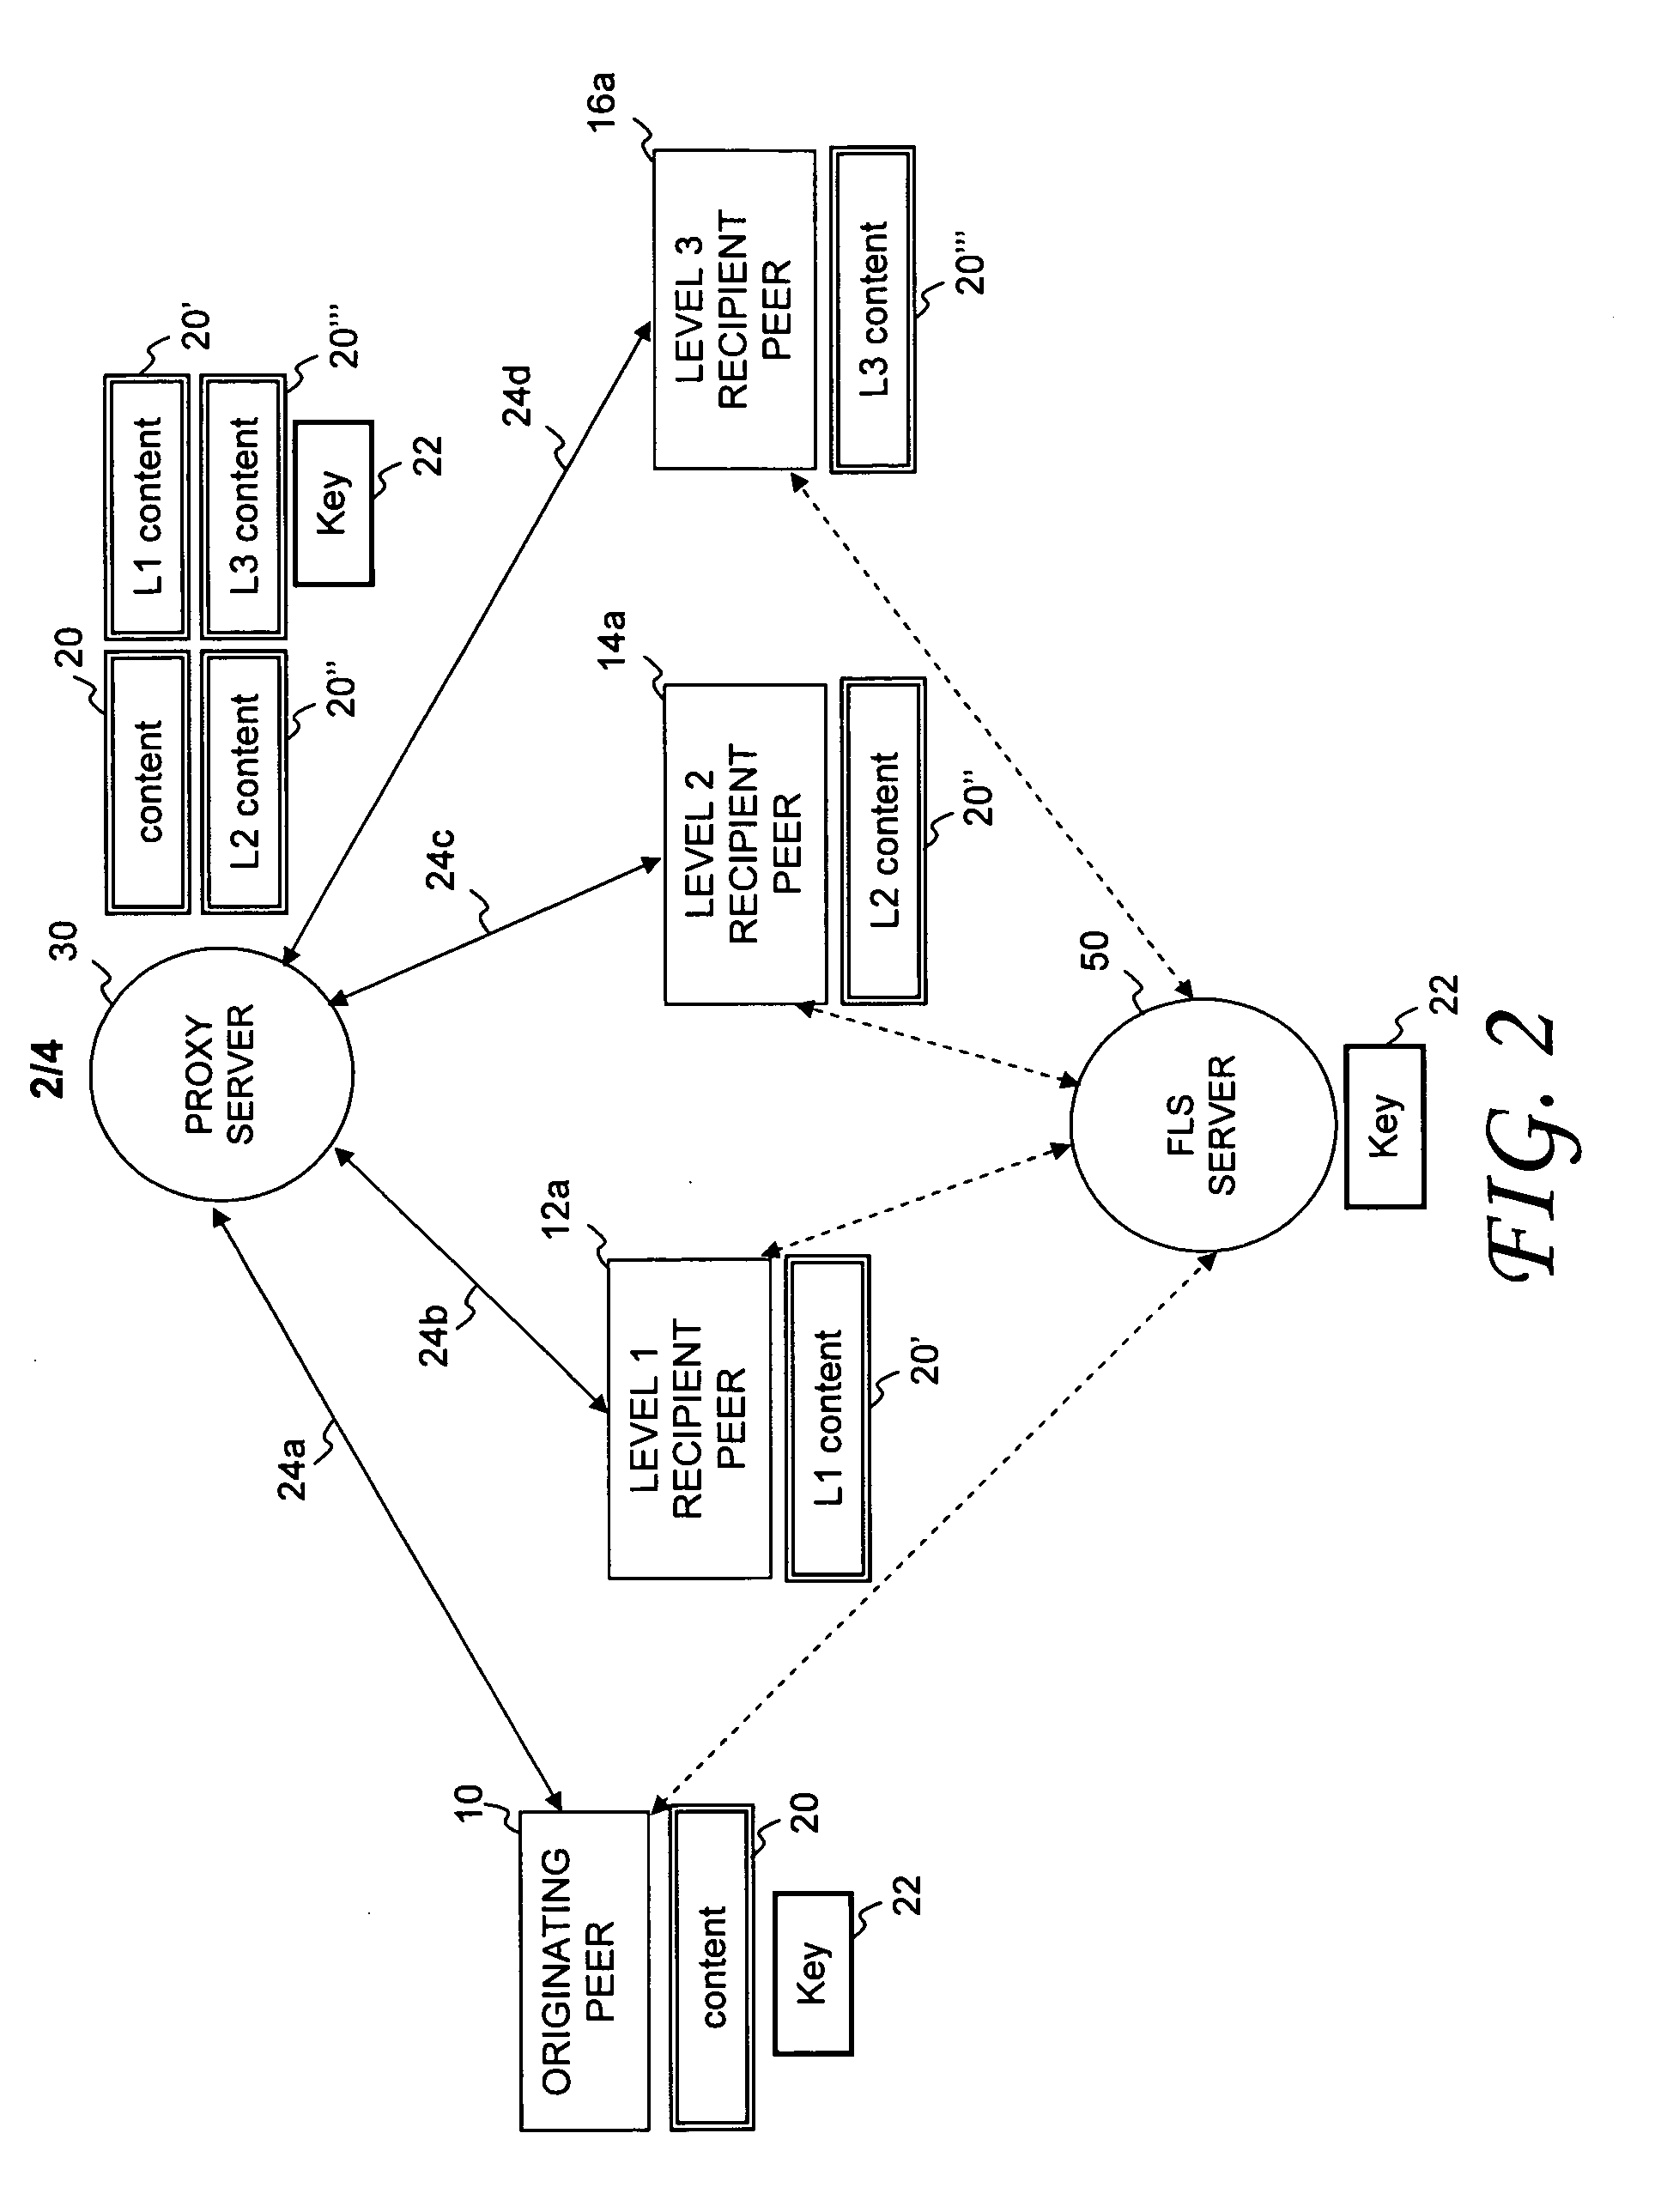 System and method of using a proxy server to manage lazy content distribution in a social network